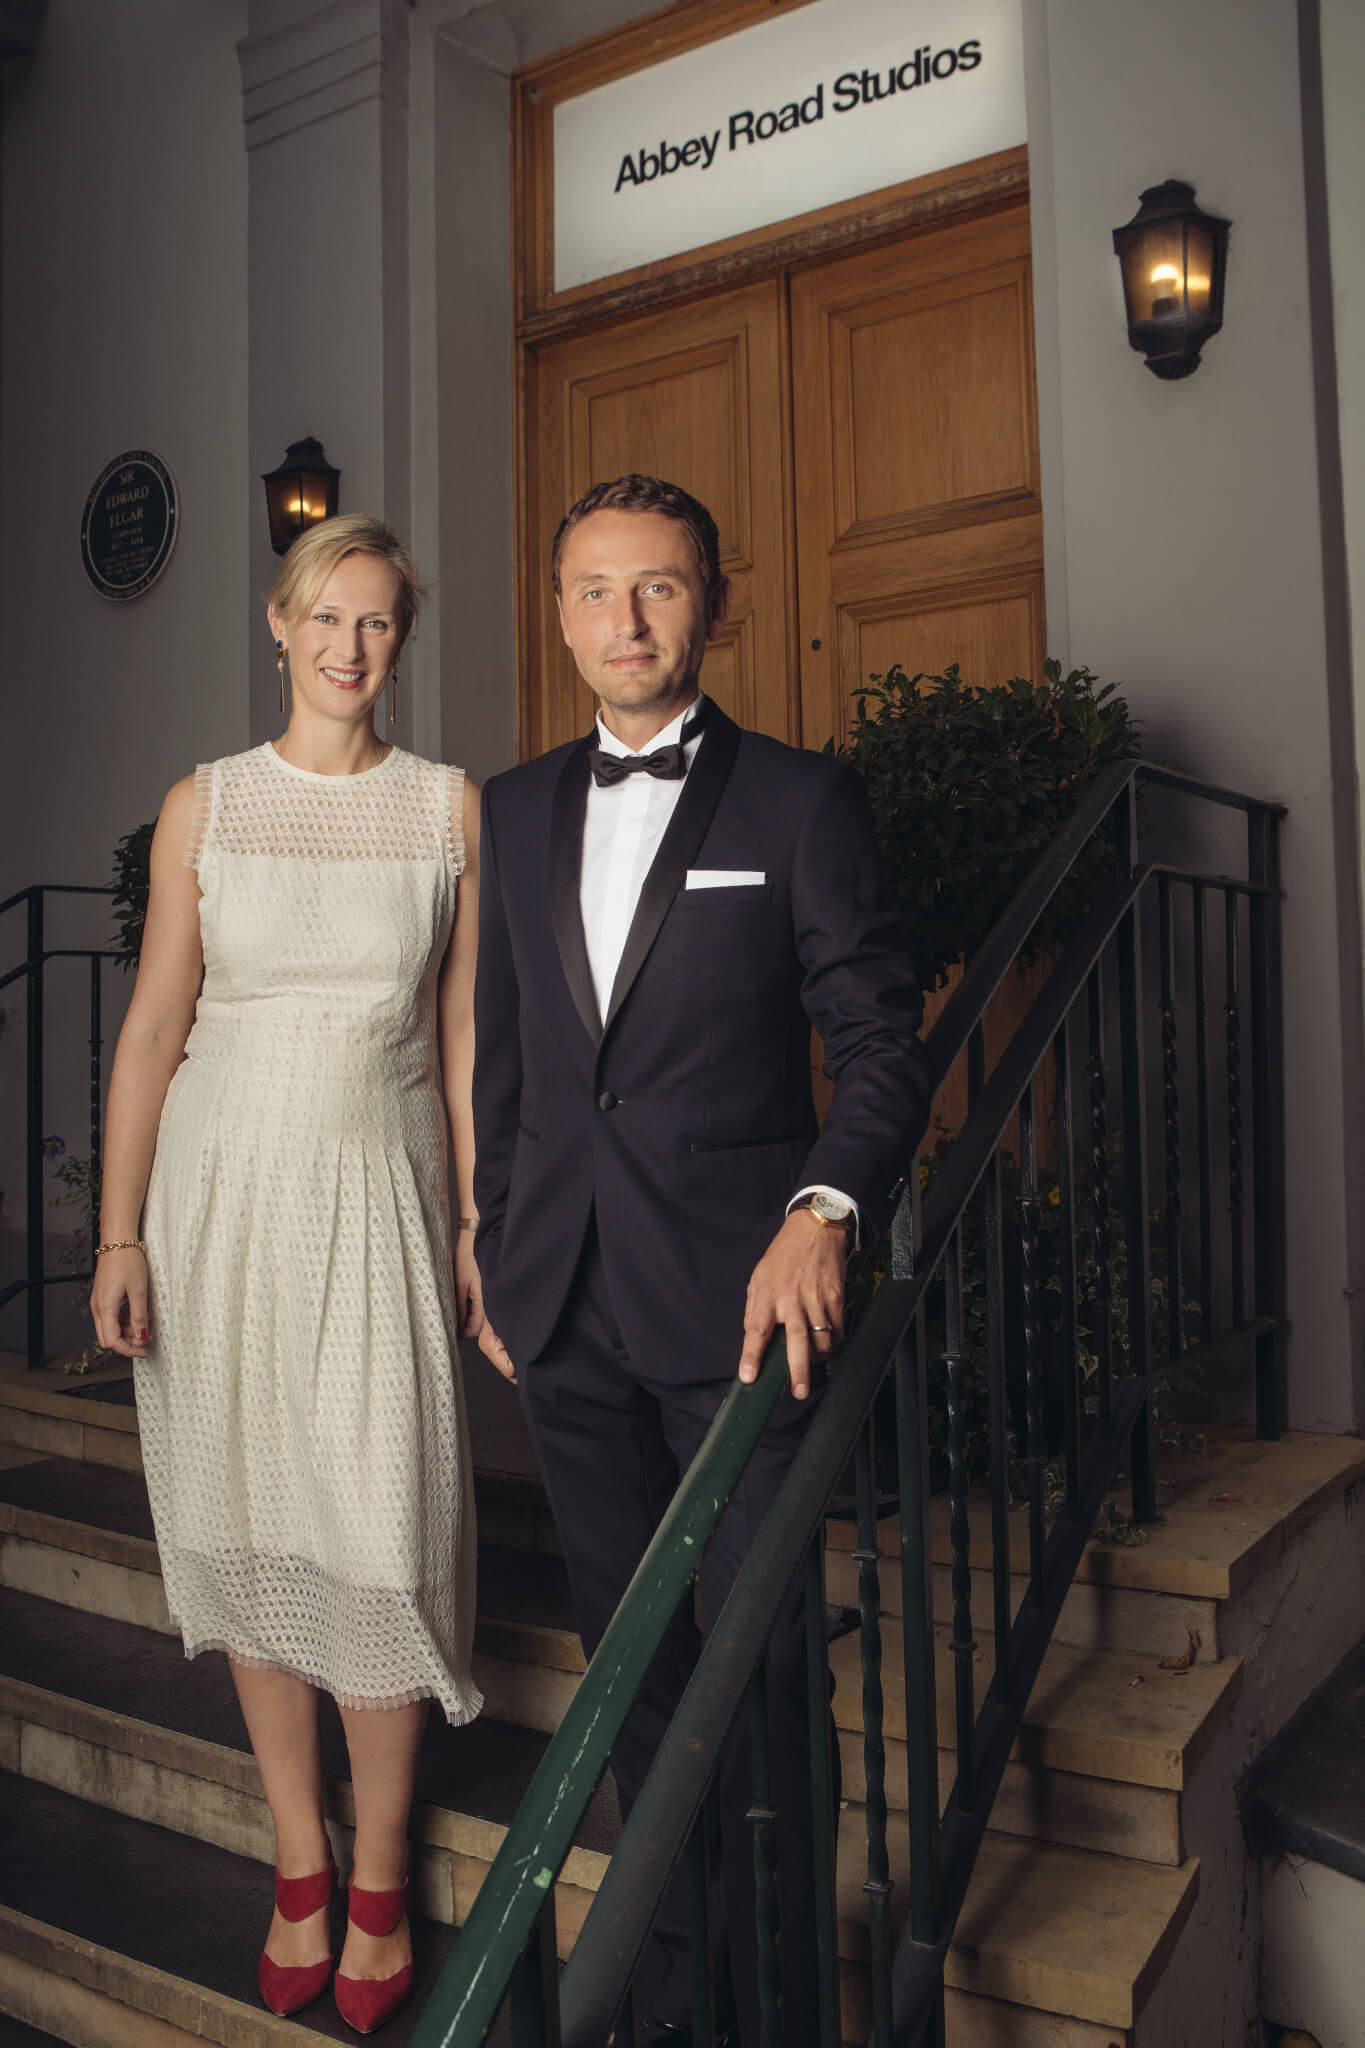 Isabel Garvey, managing director of Abby Road Studios, and Laurent Perves, chief marketing officer of Vacheron Constantin